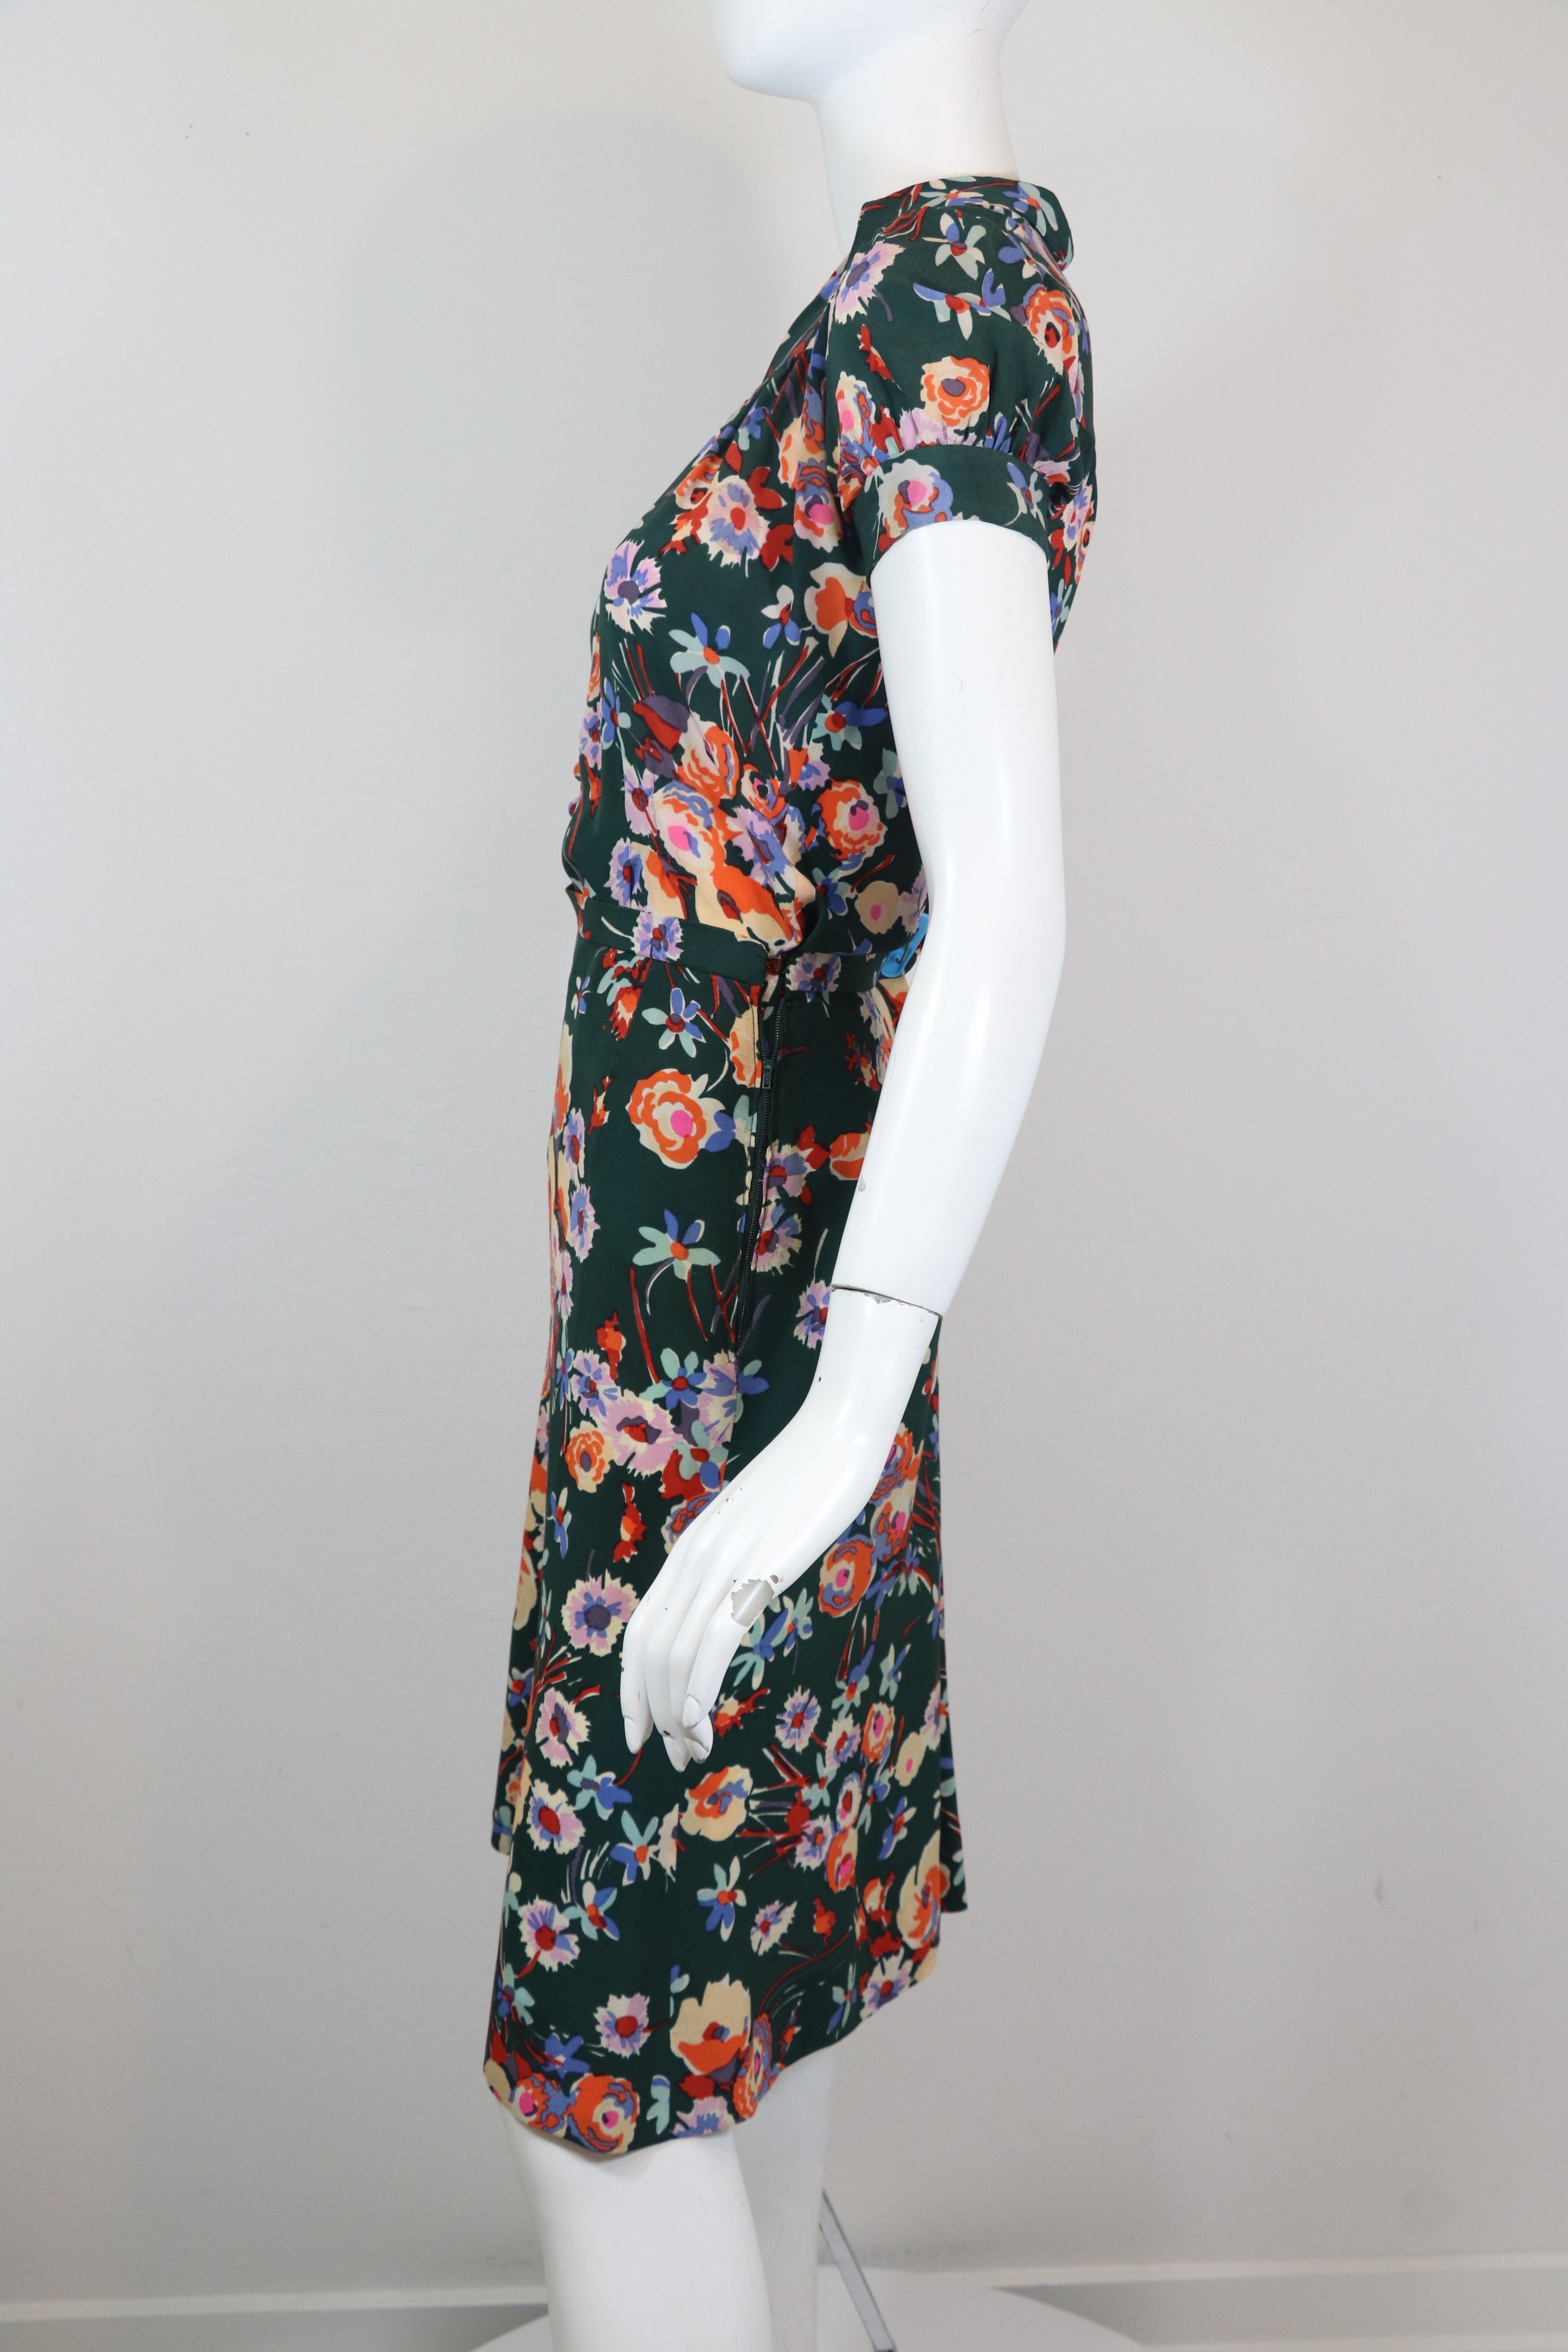 Chloe Lagerfeld Early 1970's Vintage Floral Print Skirt and Blouse 38 1